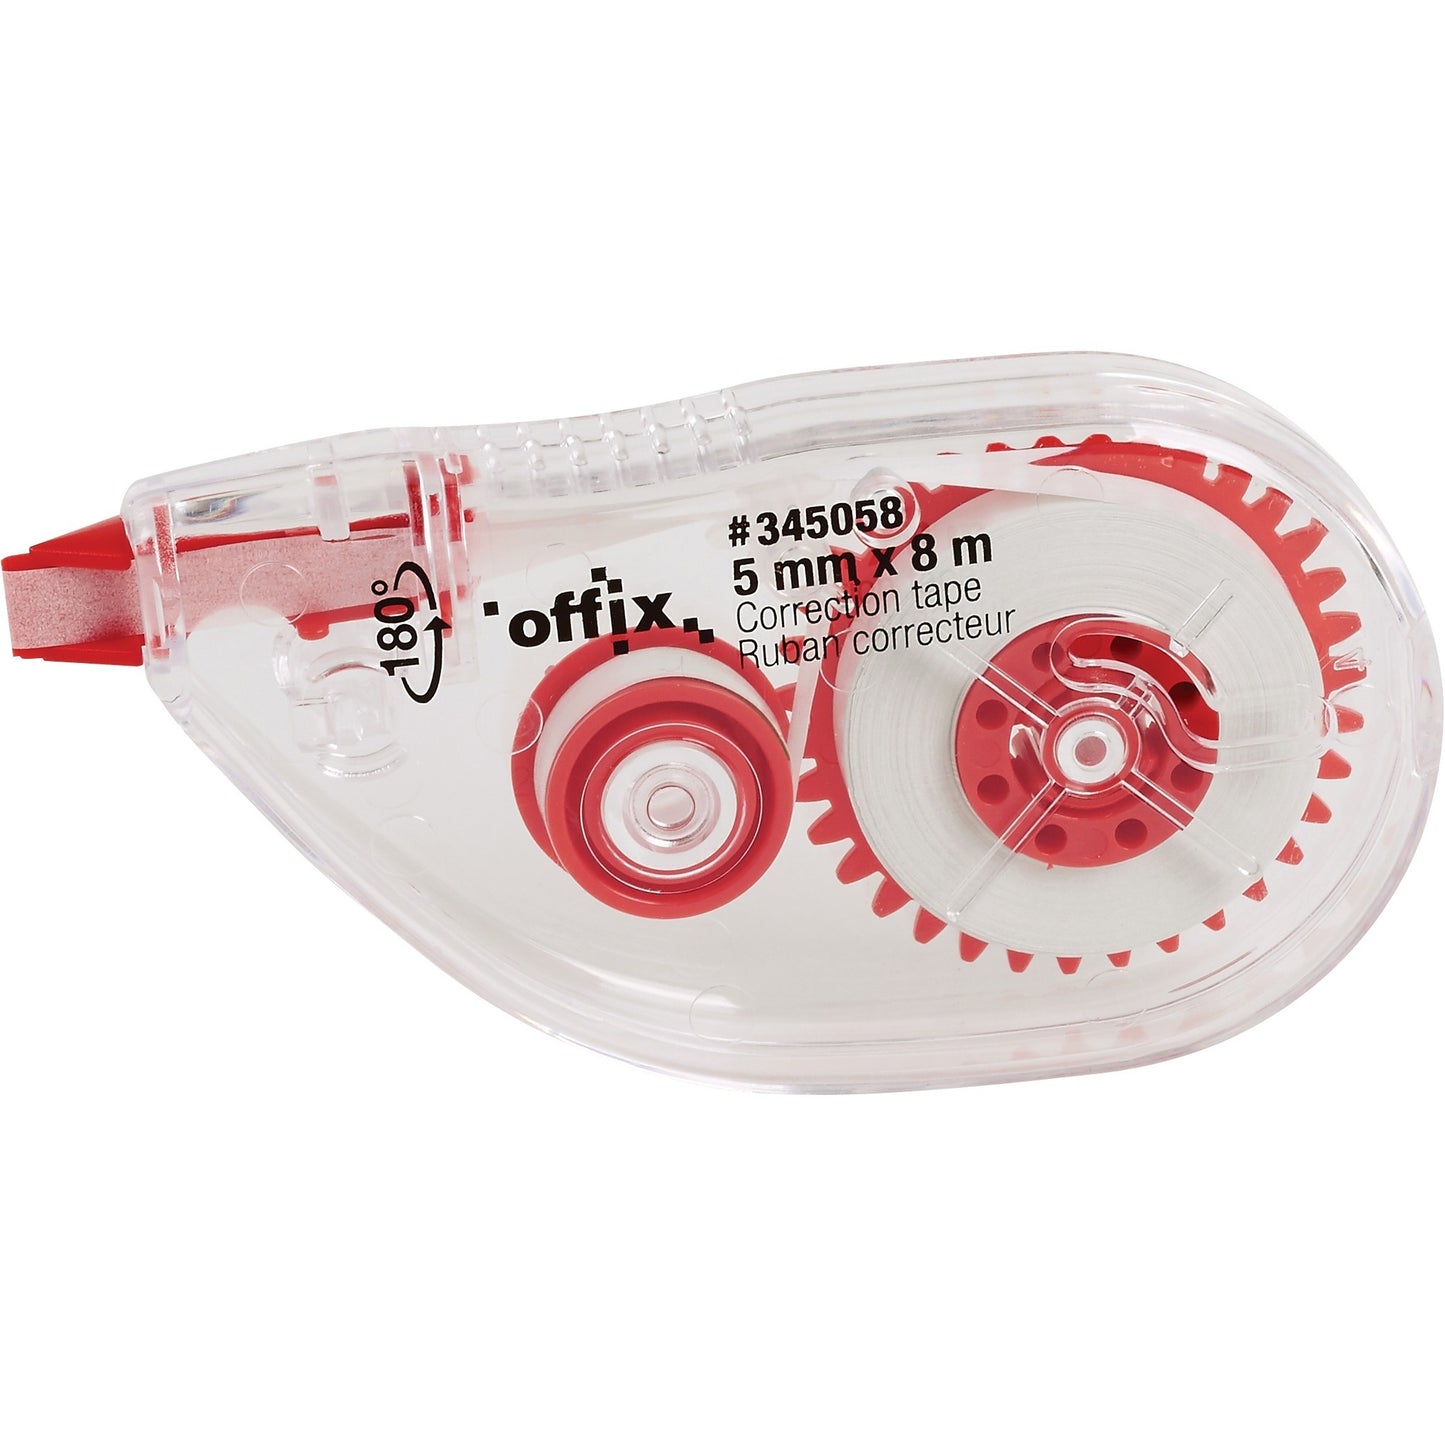 Offix Correction Tape